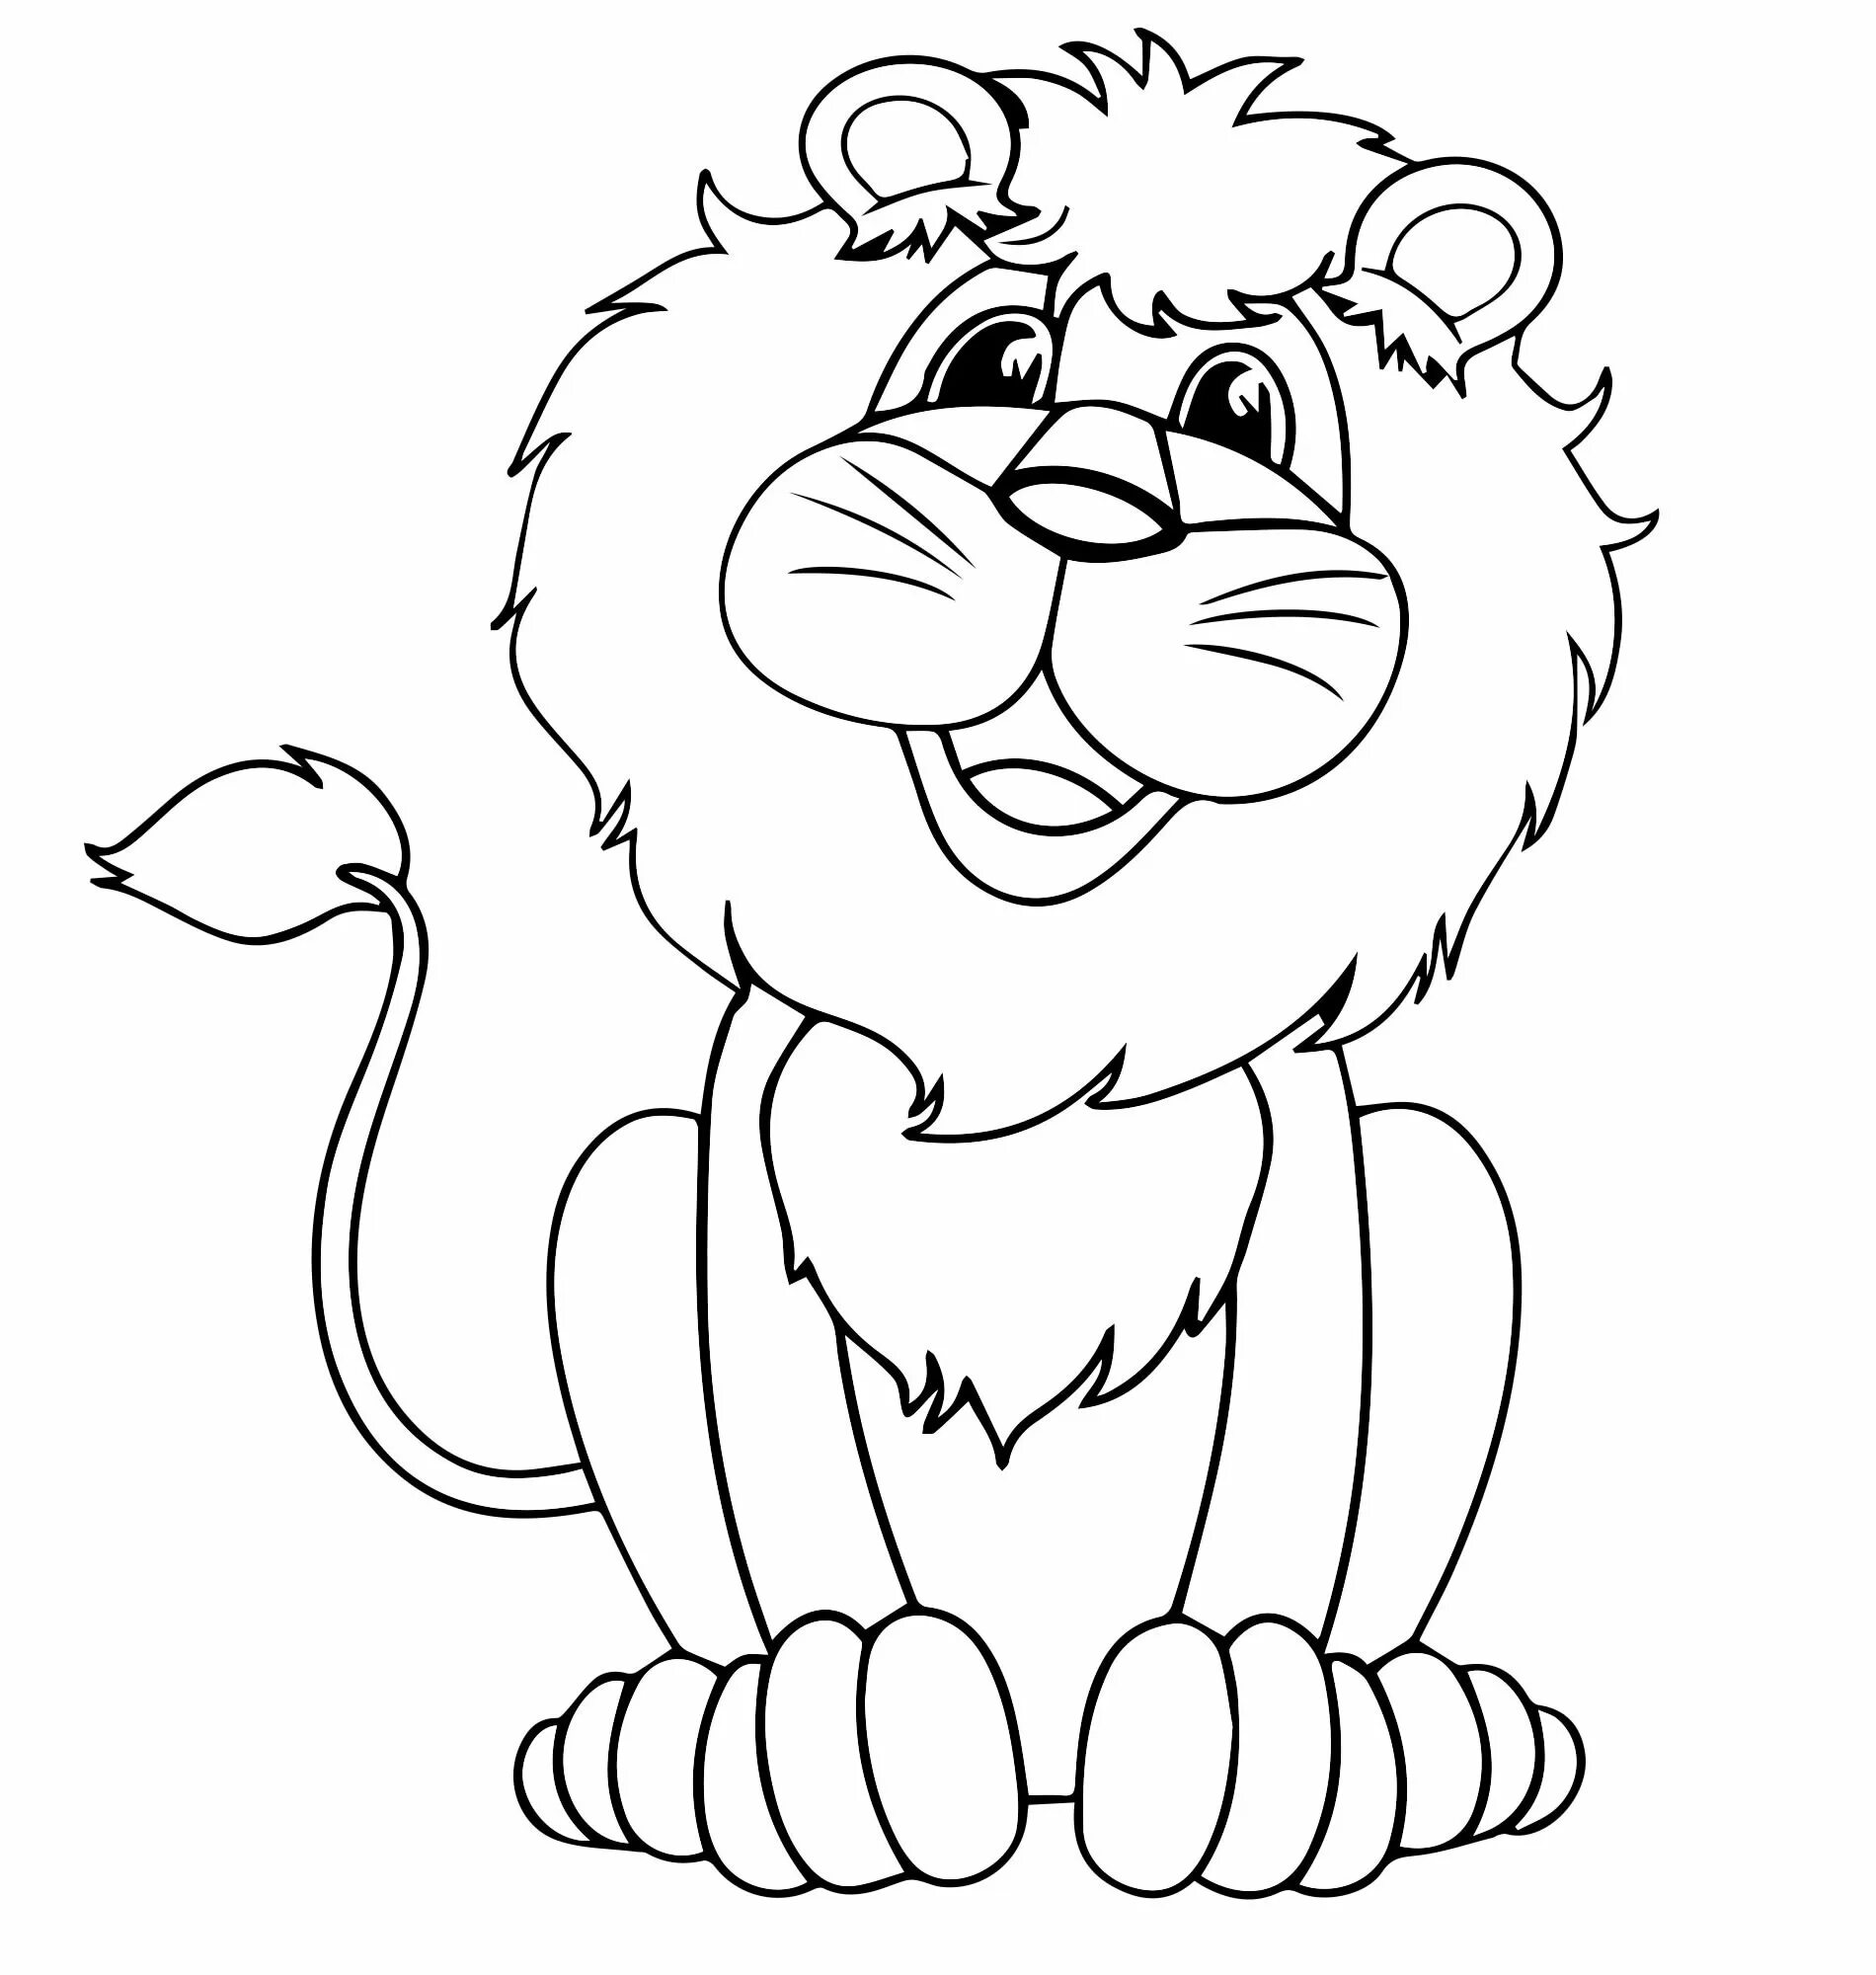 Coloring book shining lion for children 3-4 years old